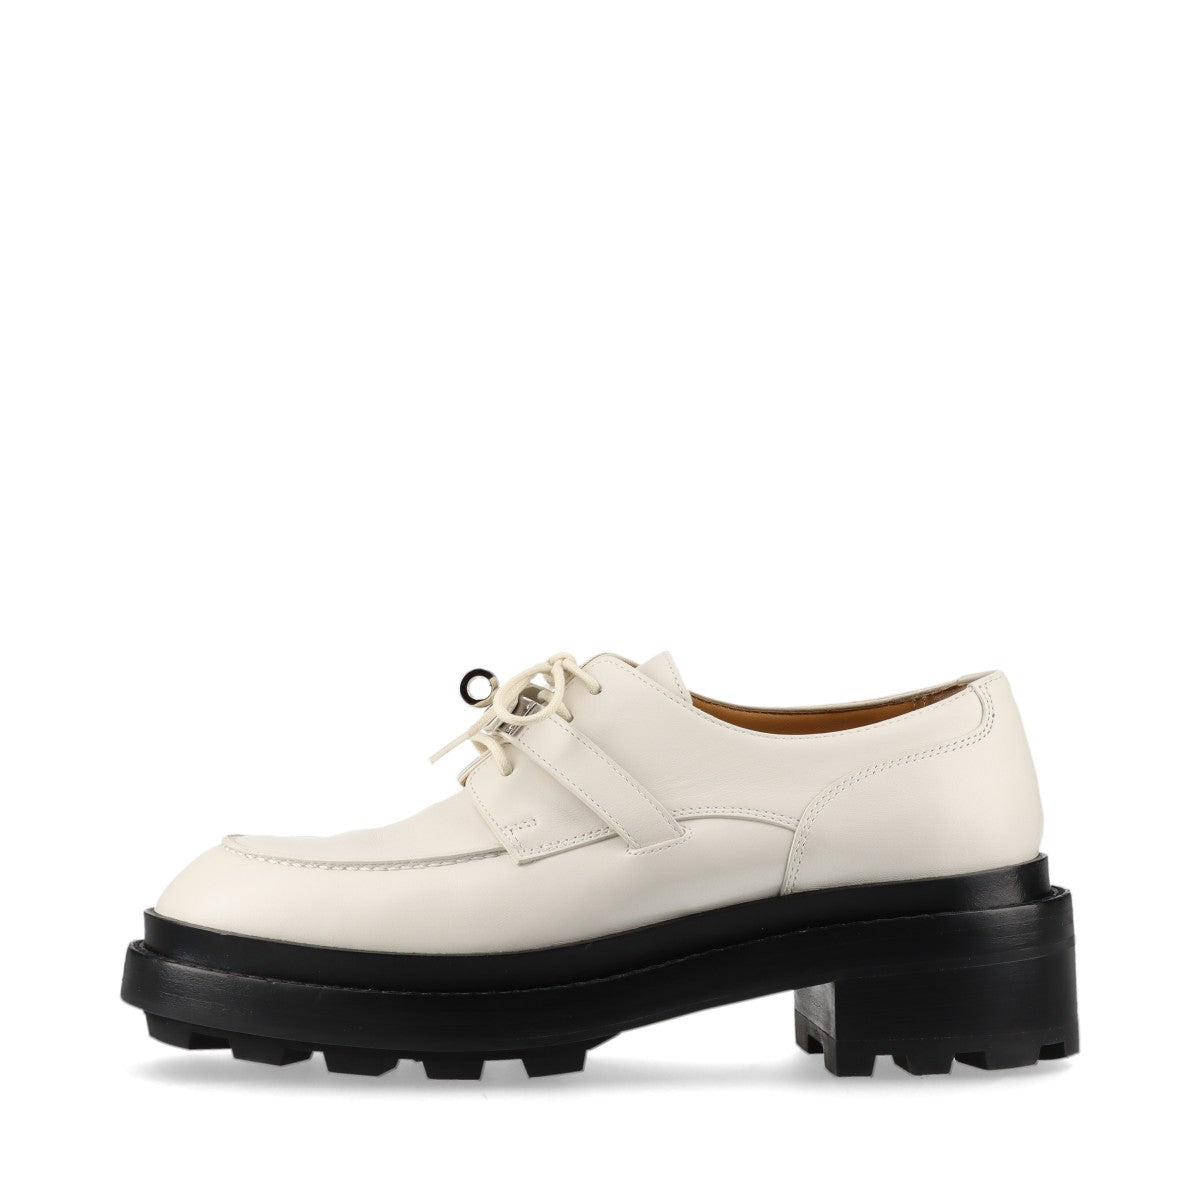 Hermès Fast Leather Leather shoes EU37 Ladies' Ivory Kelly Metal Fittings